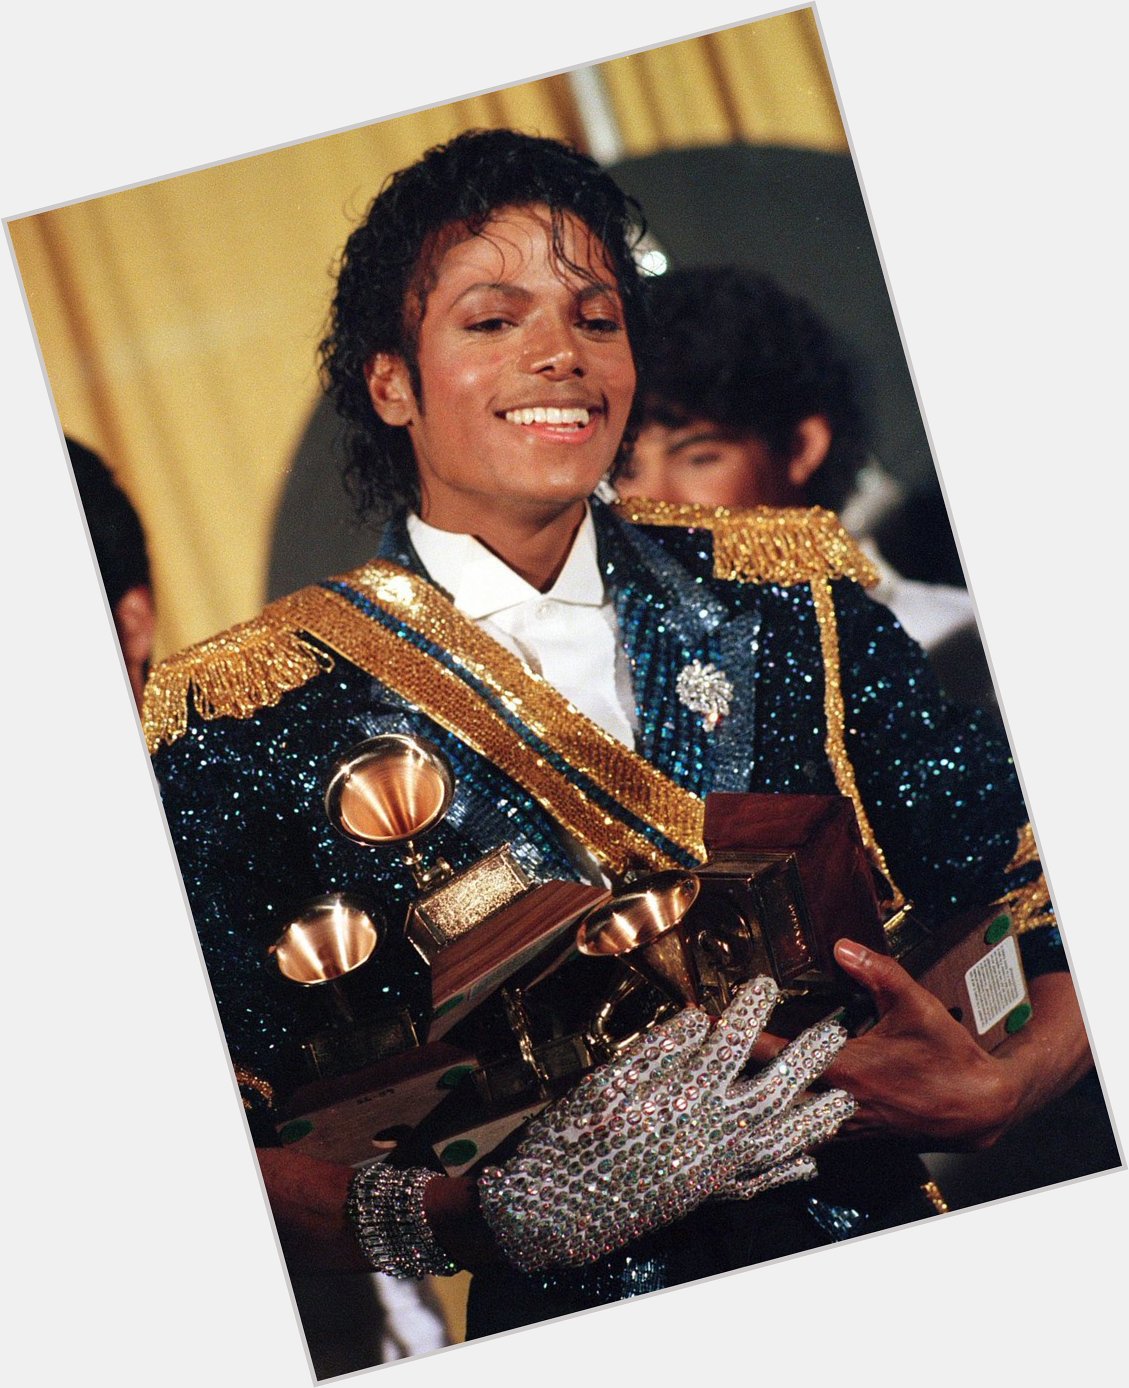 Happy Birthday to the greatest entertainer of all time, Michael Jackson. 